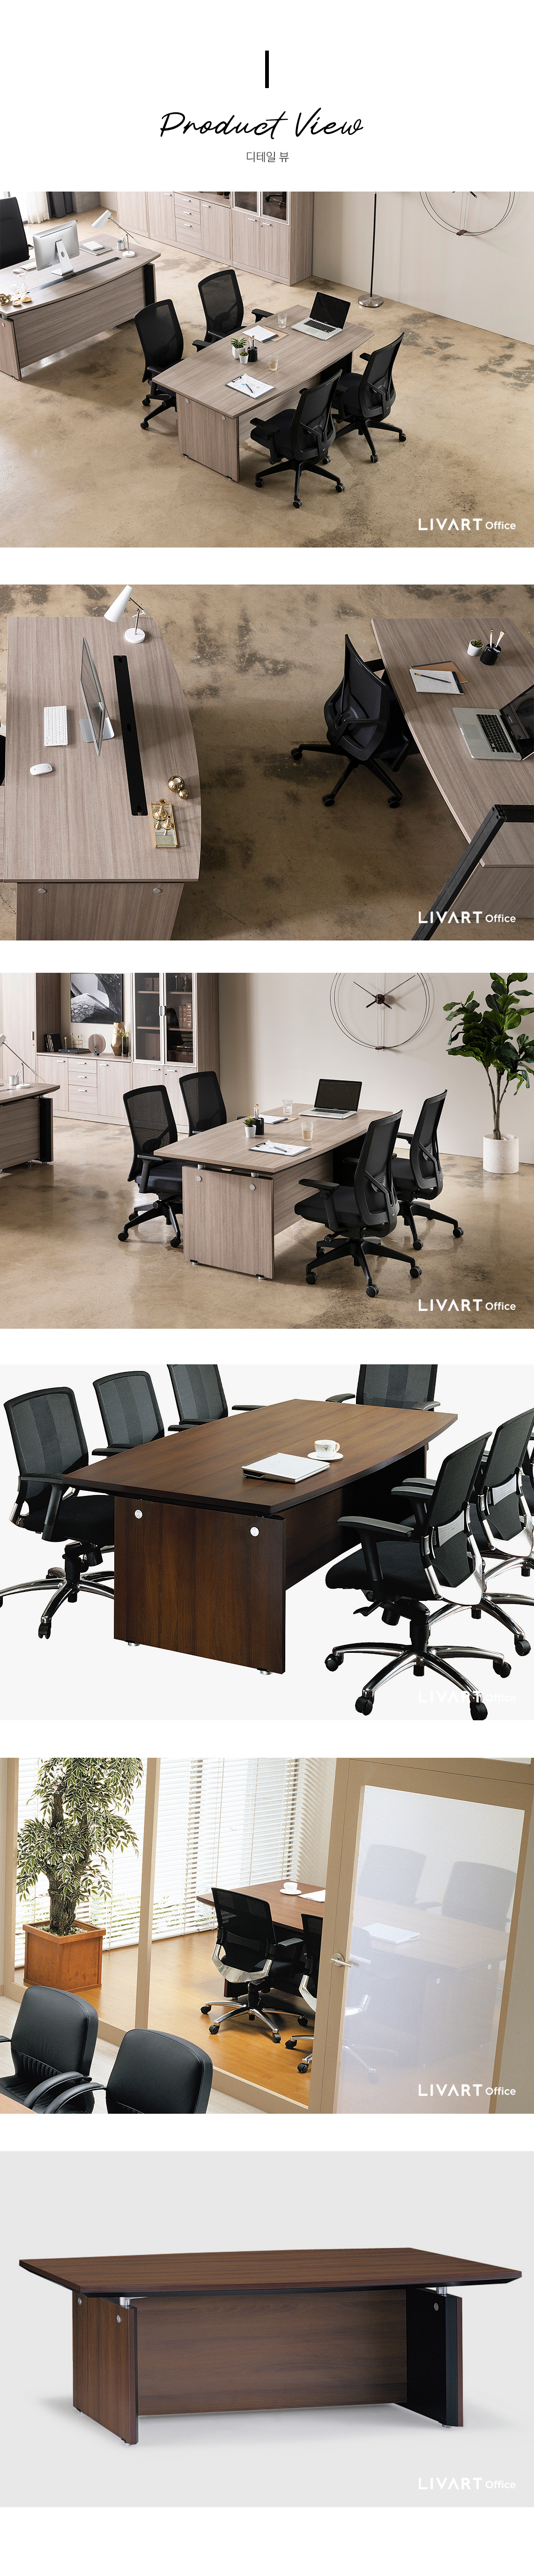 2023_lacus6400g_conference_table_04.jpg